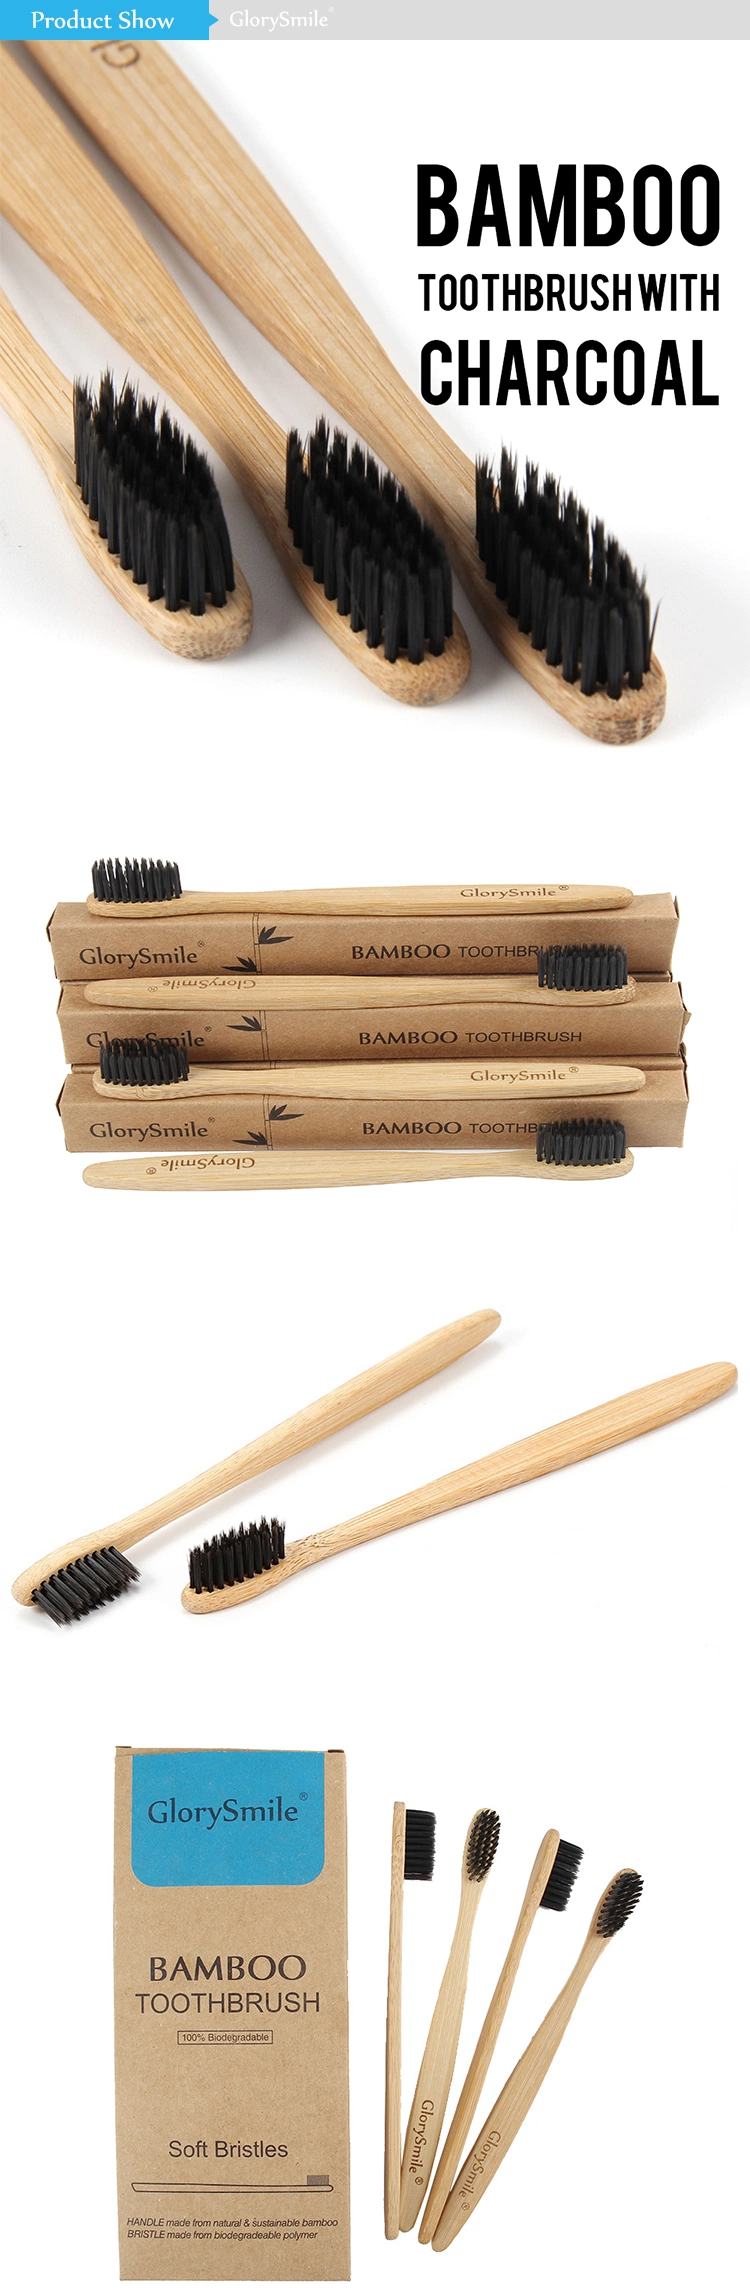 Biodegradable Natural Wood Handle Hotel Adult Charcoal Bamboo Toothbrush